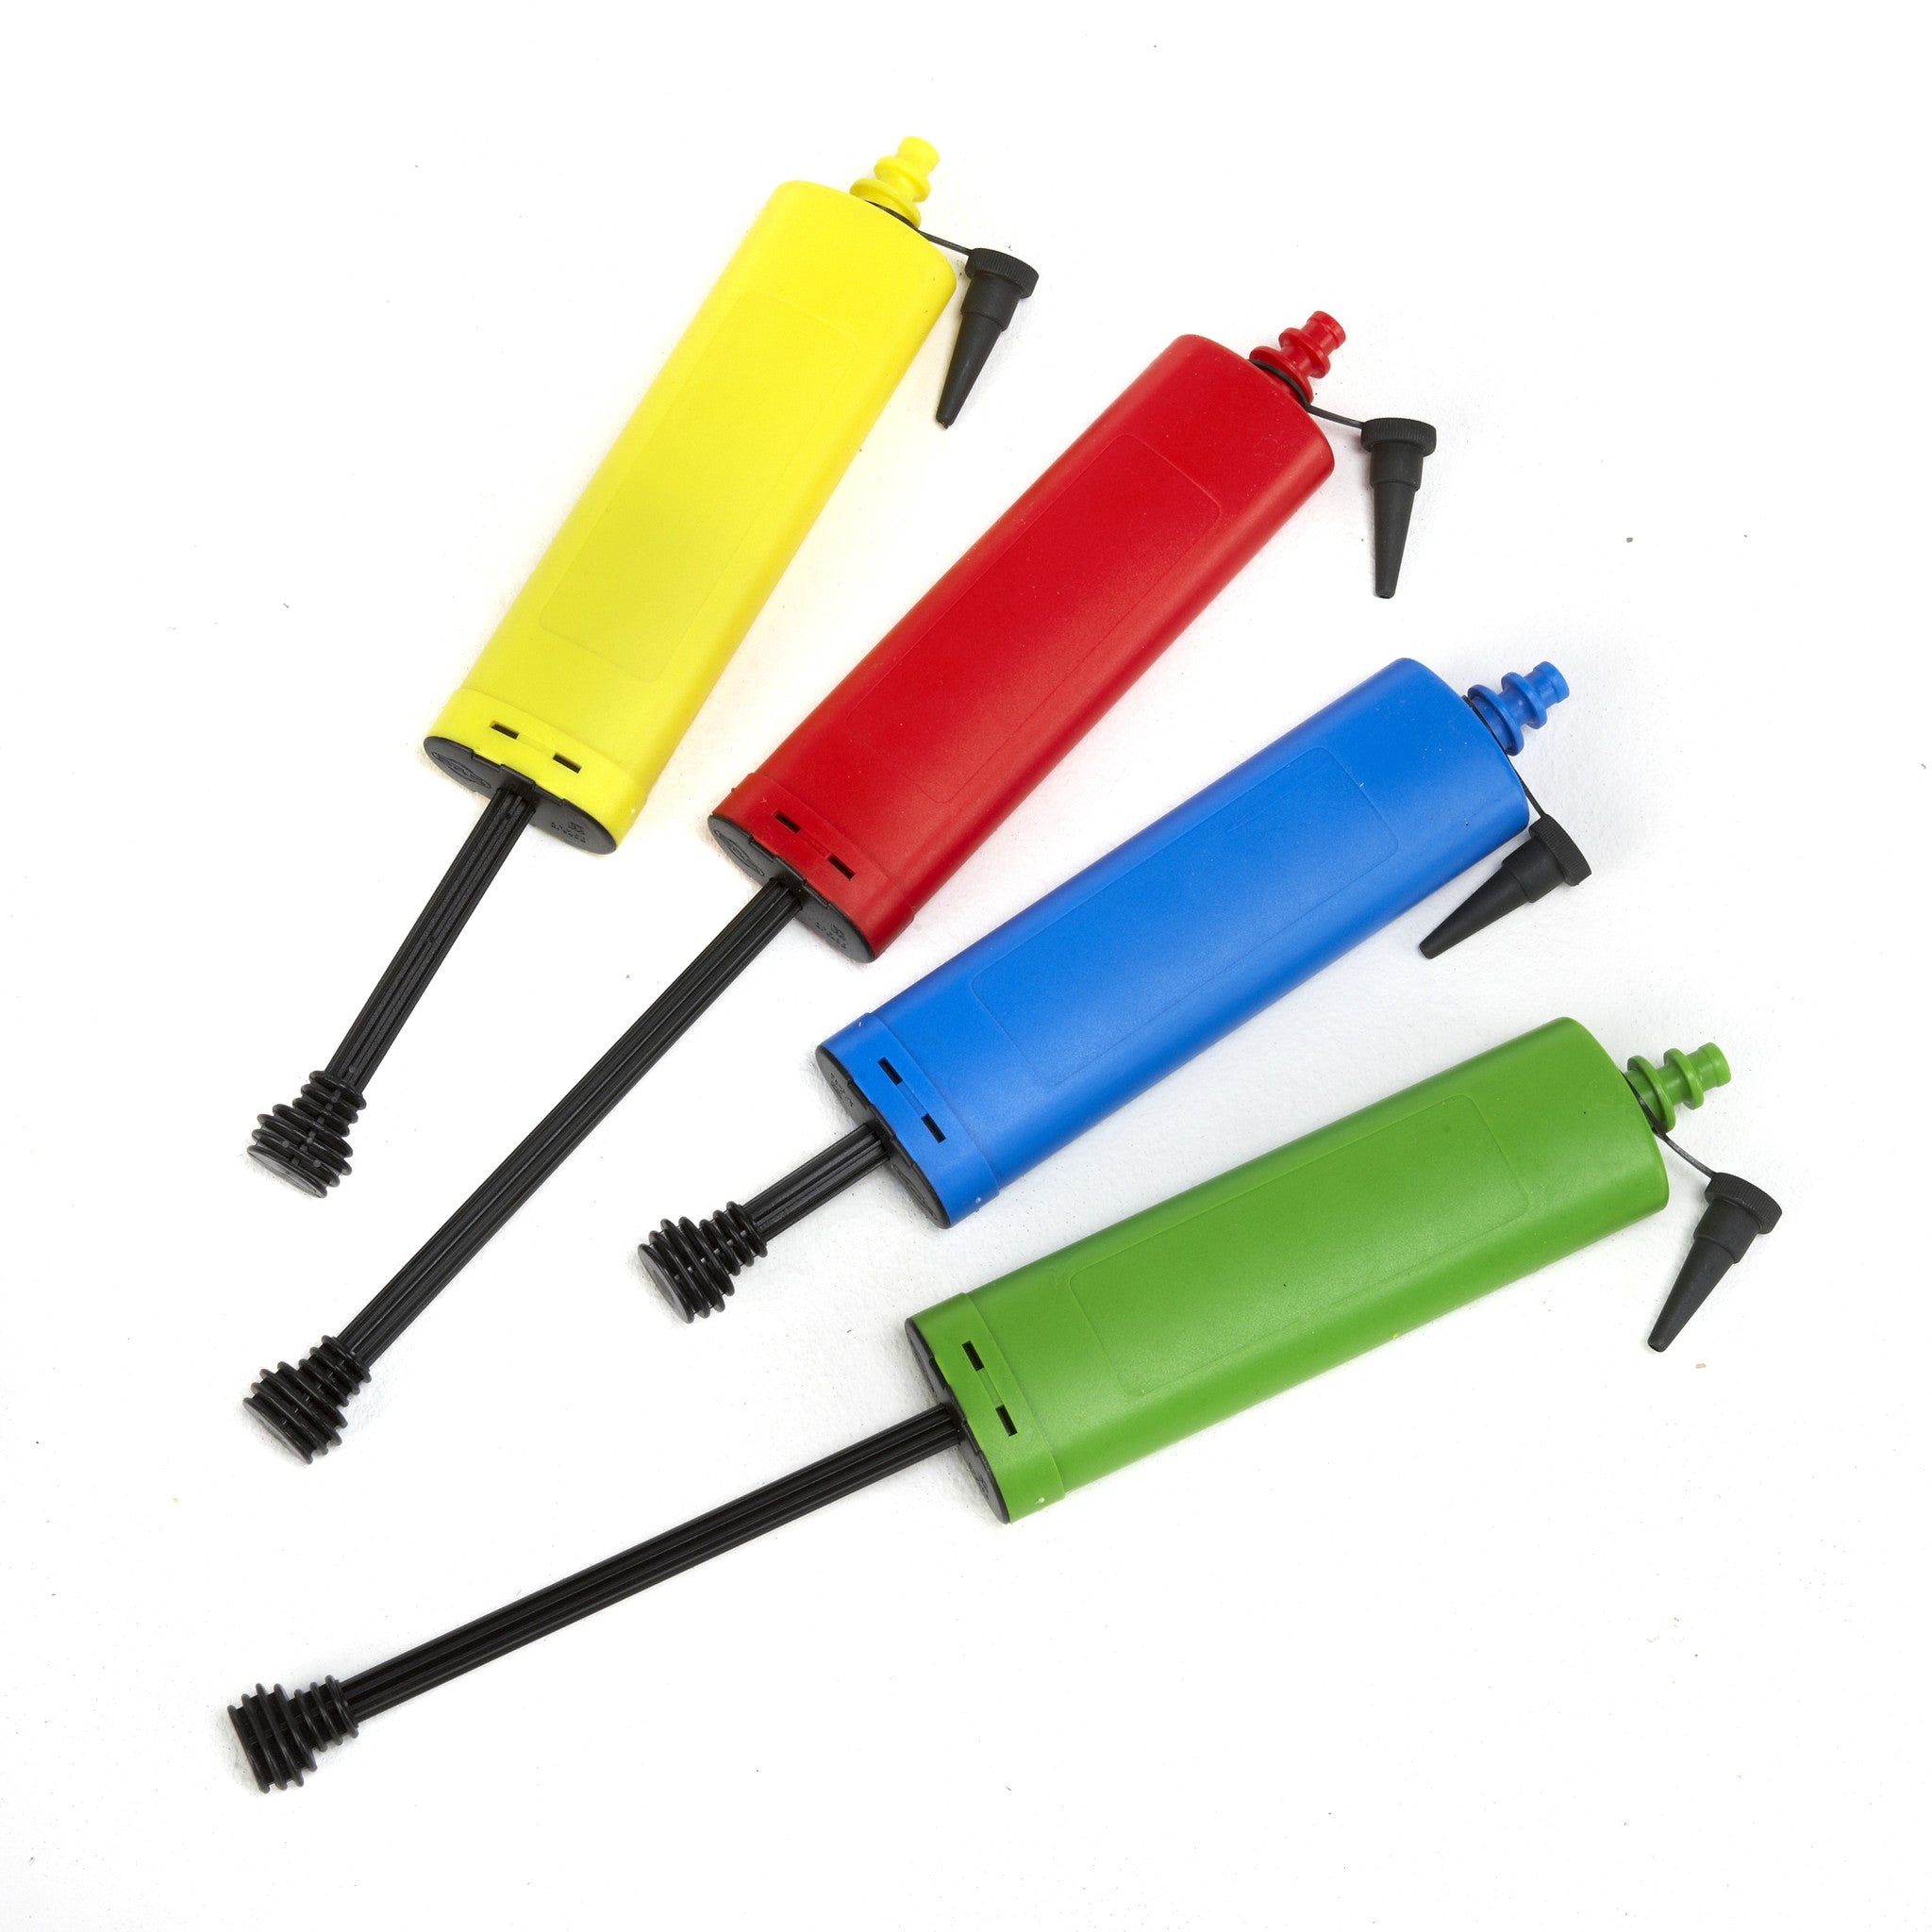 Balloon pumps in bright colours. Economical and hard-wearing.